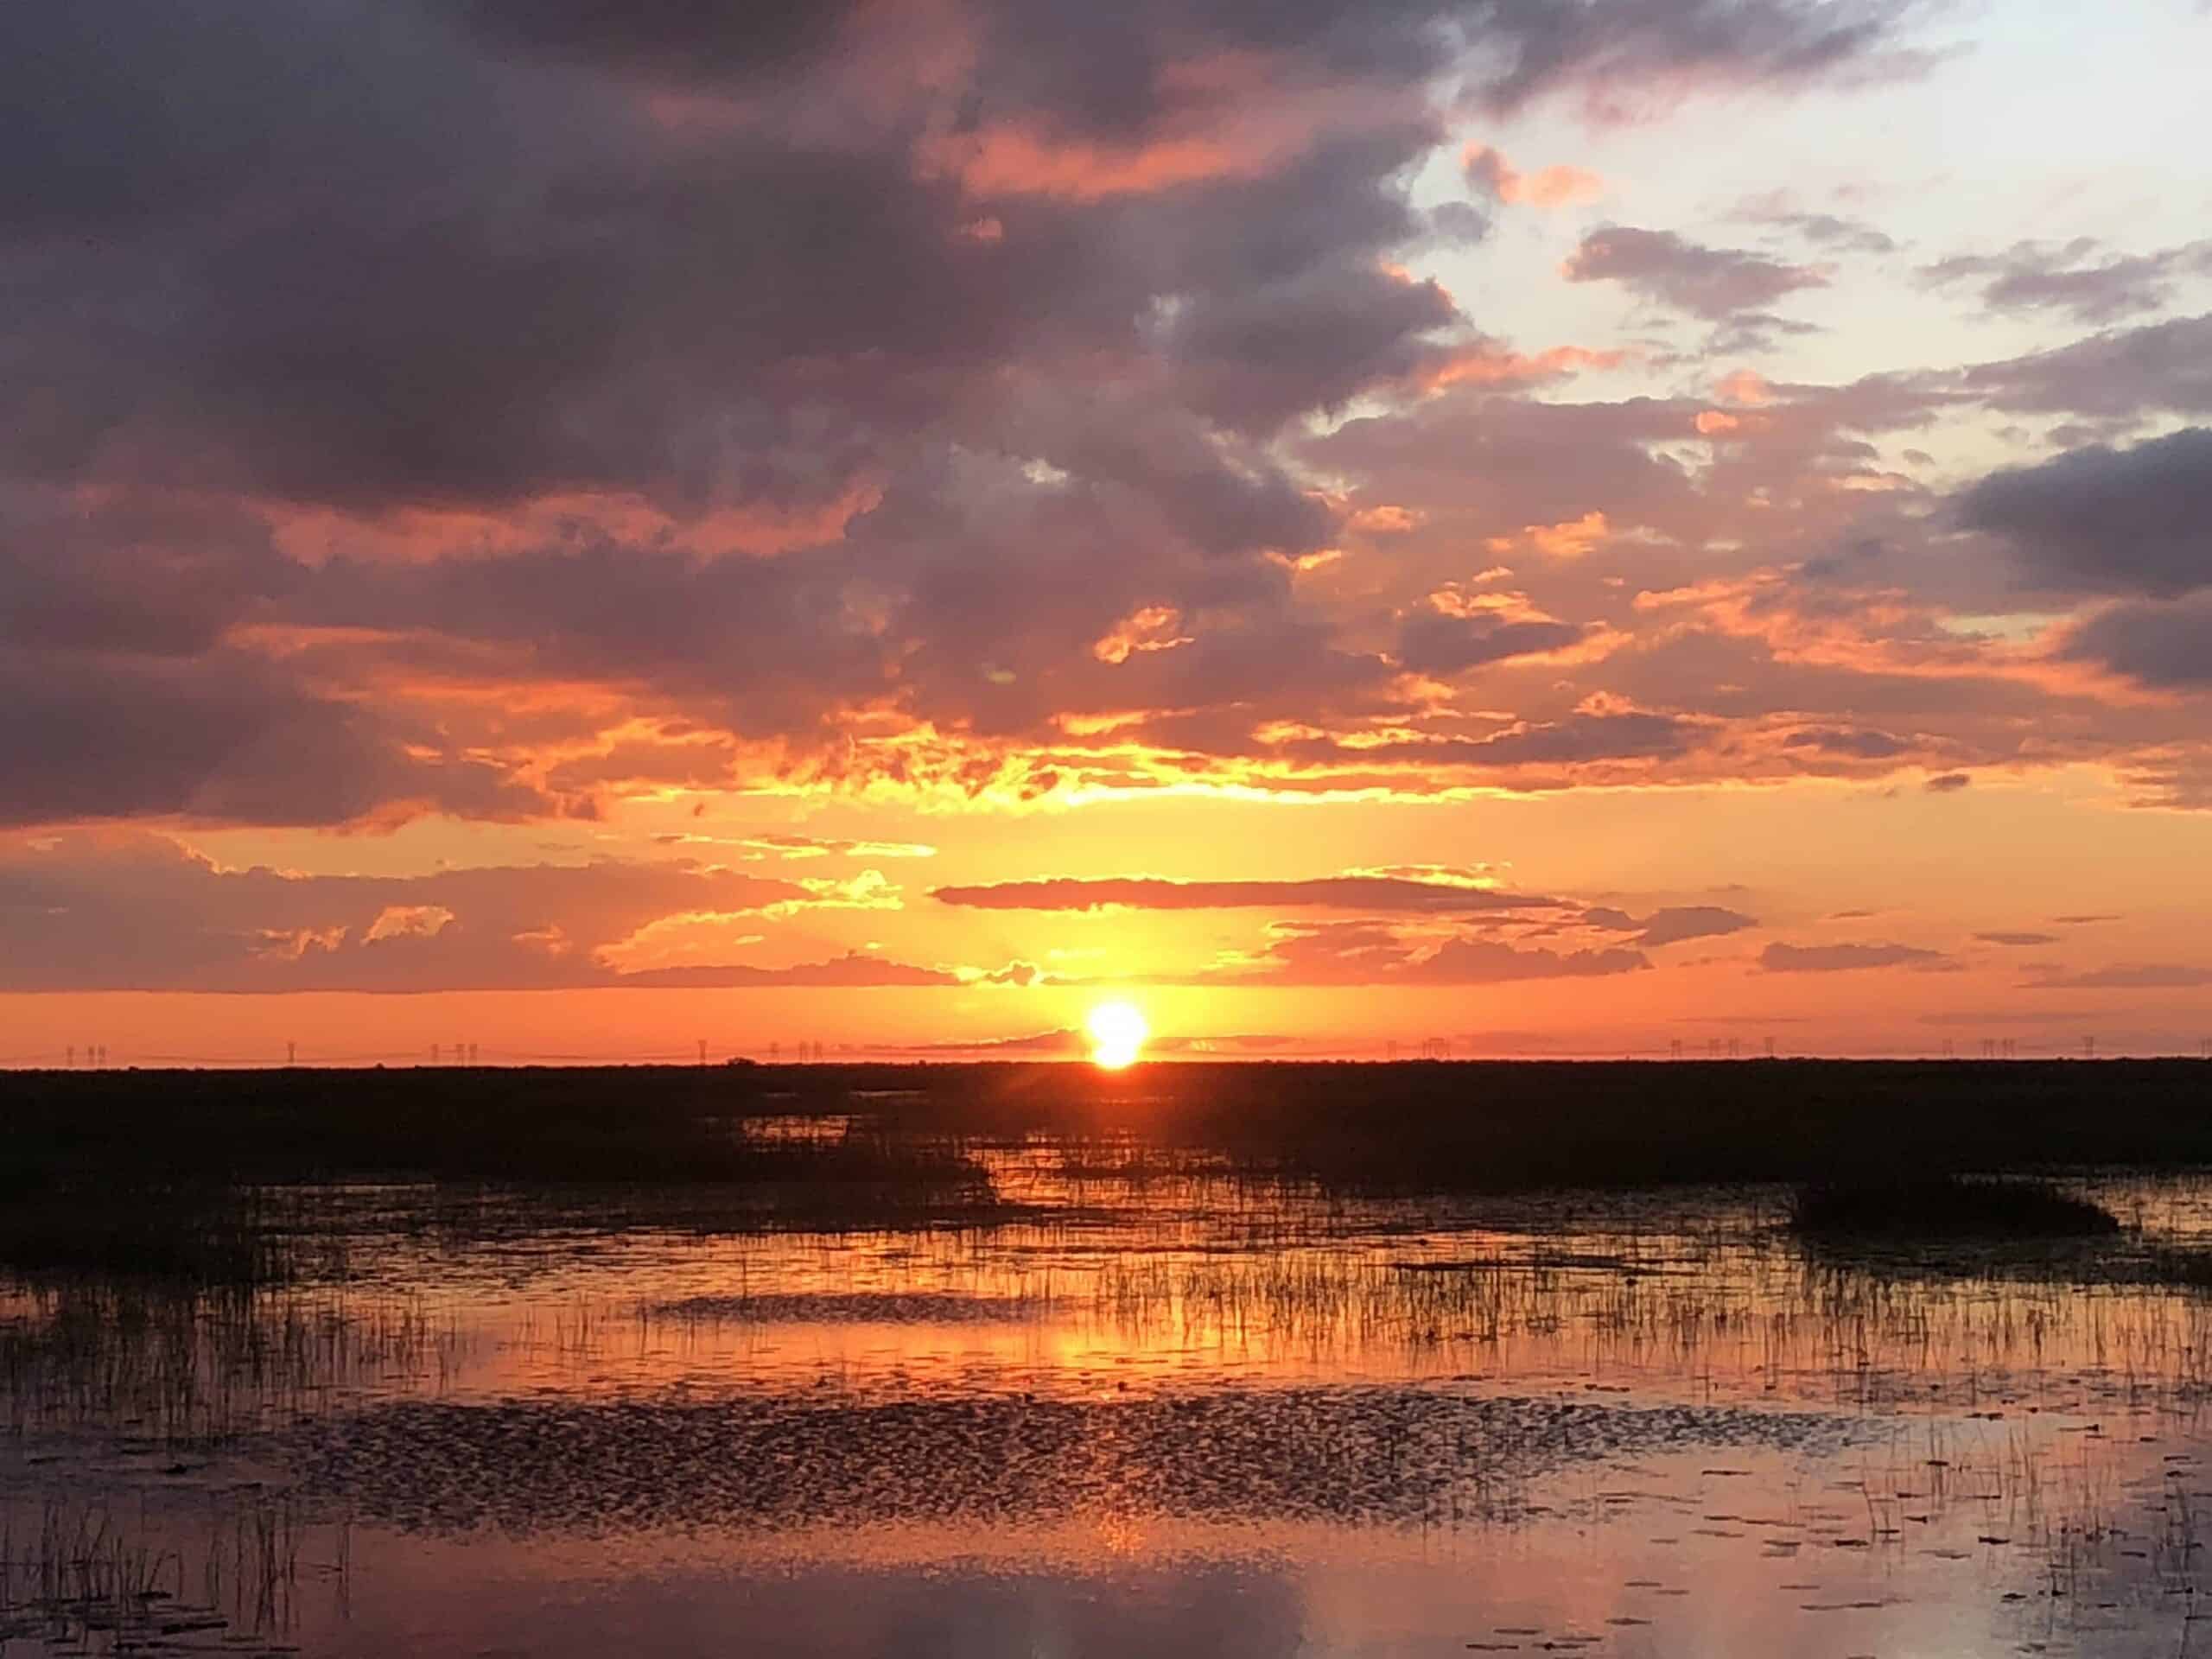 Sunset Everglades airboat rides in Fort Lauderdale, FL.